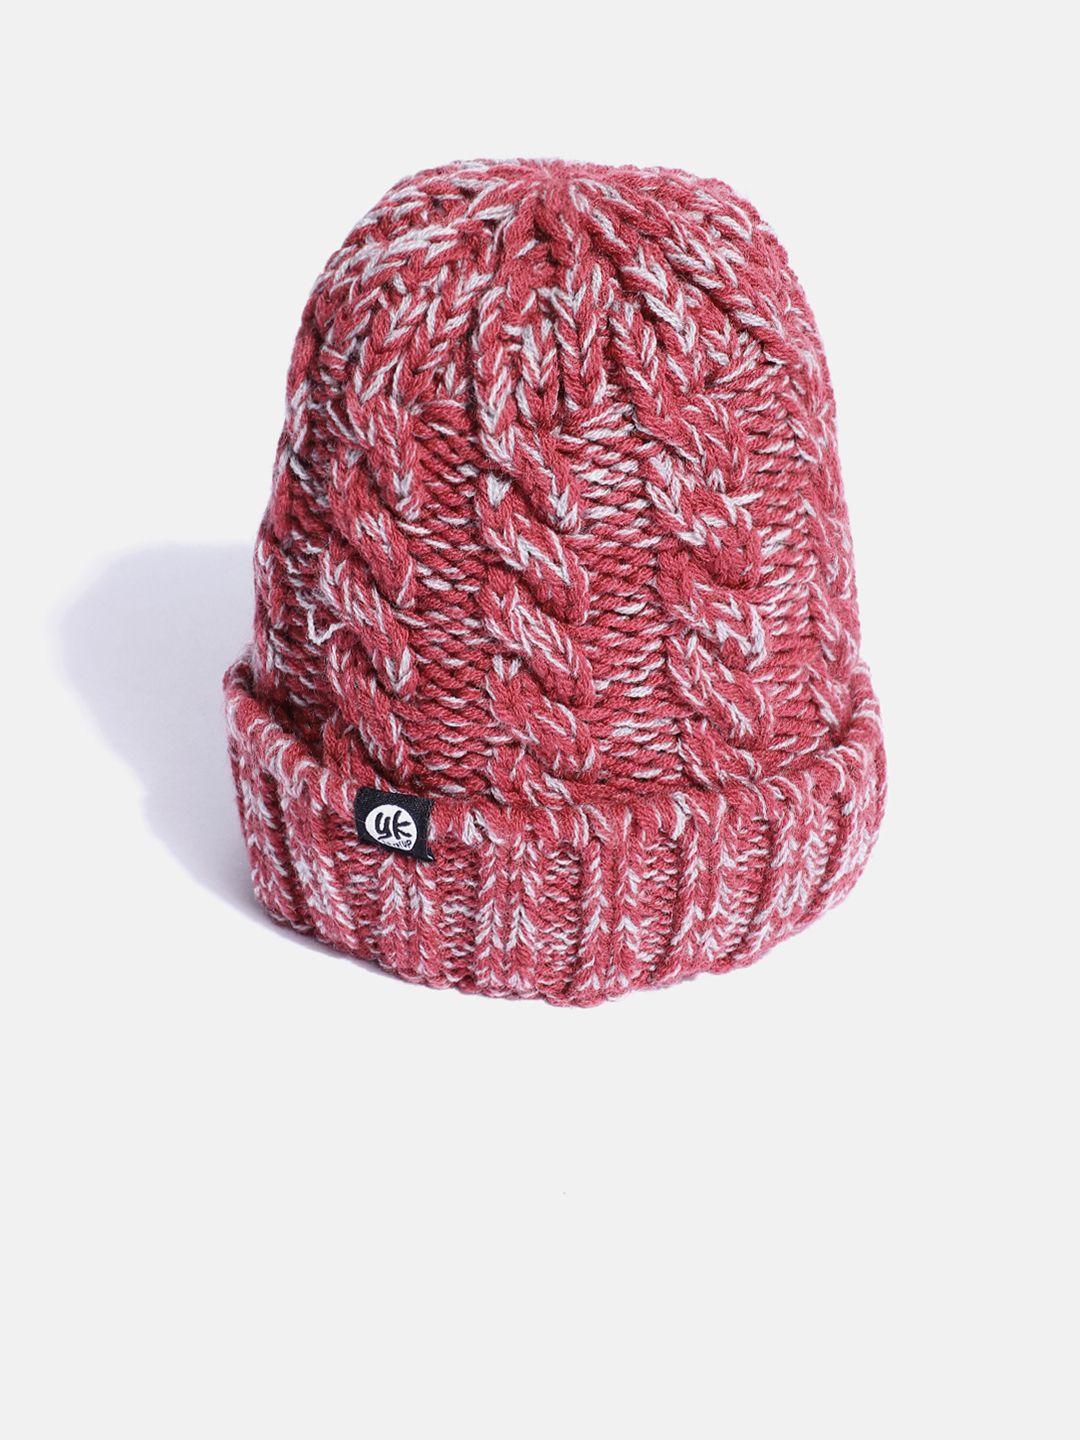 yk kids maroon & grey cable knit self-design beanie